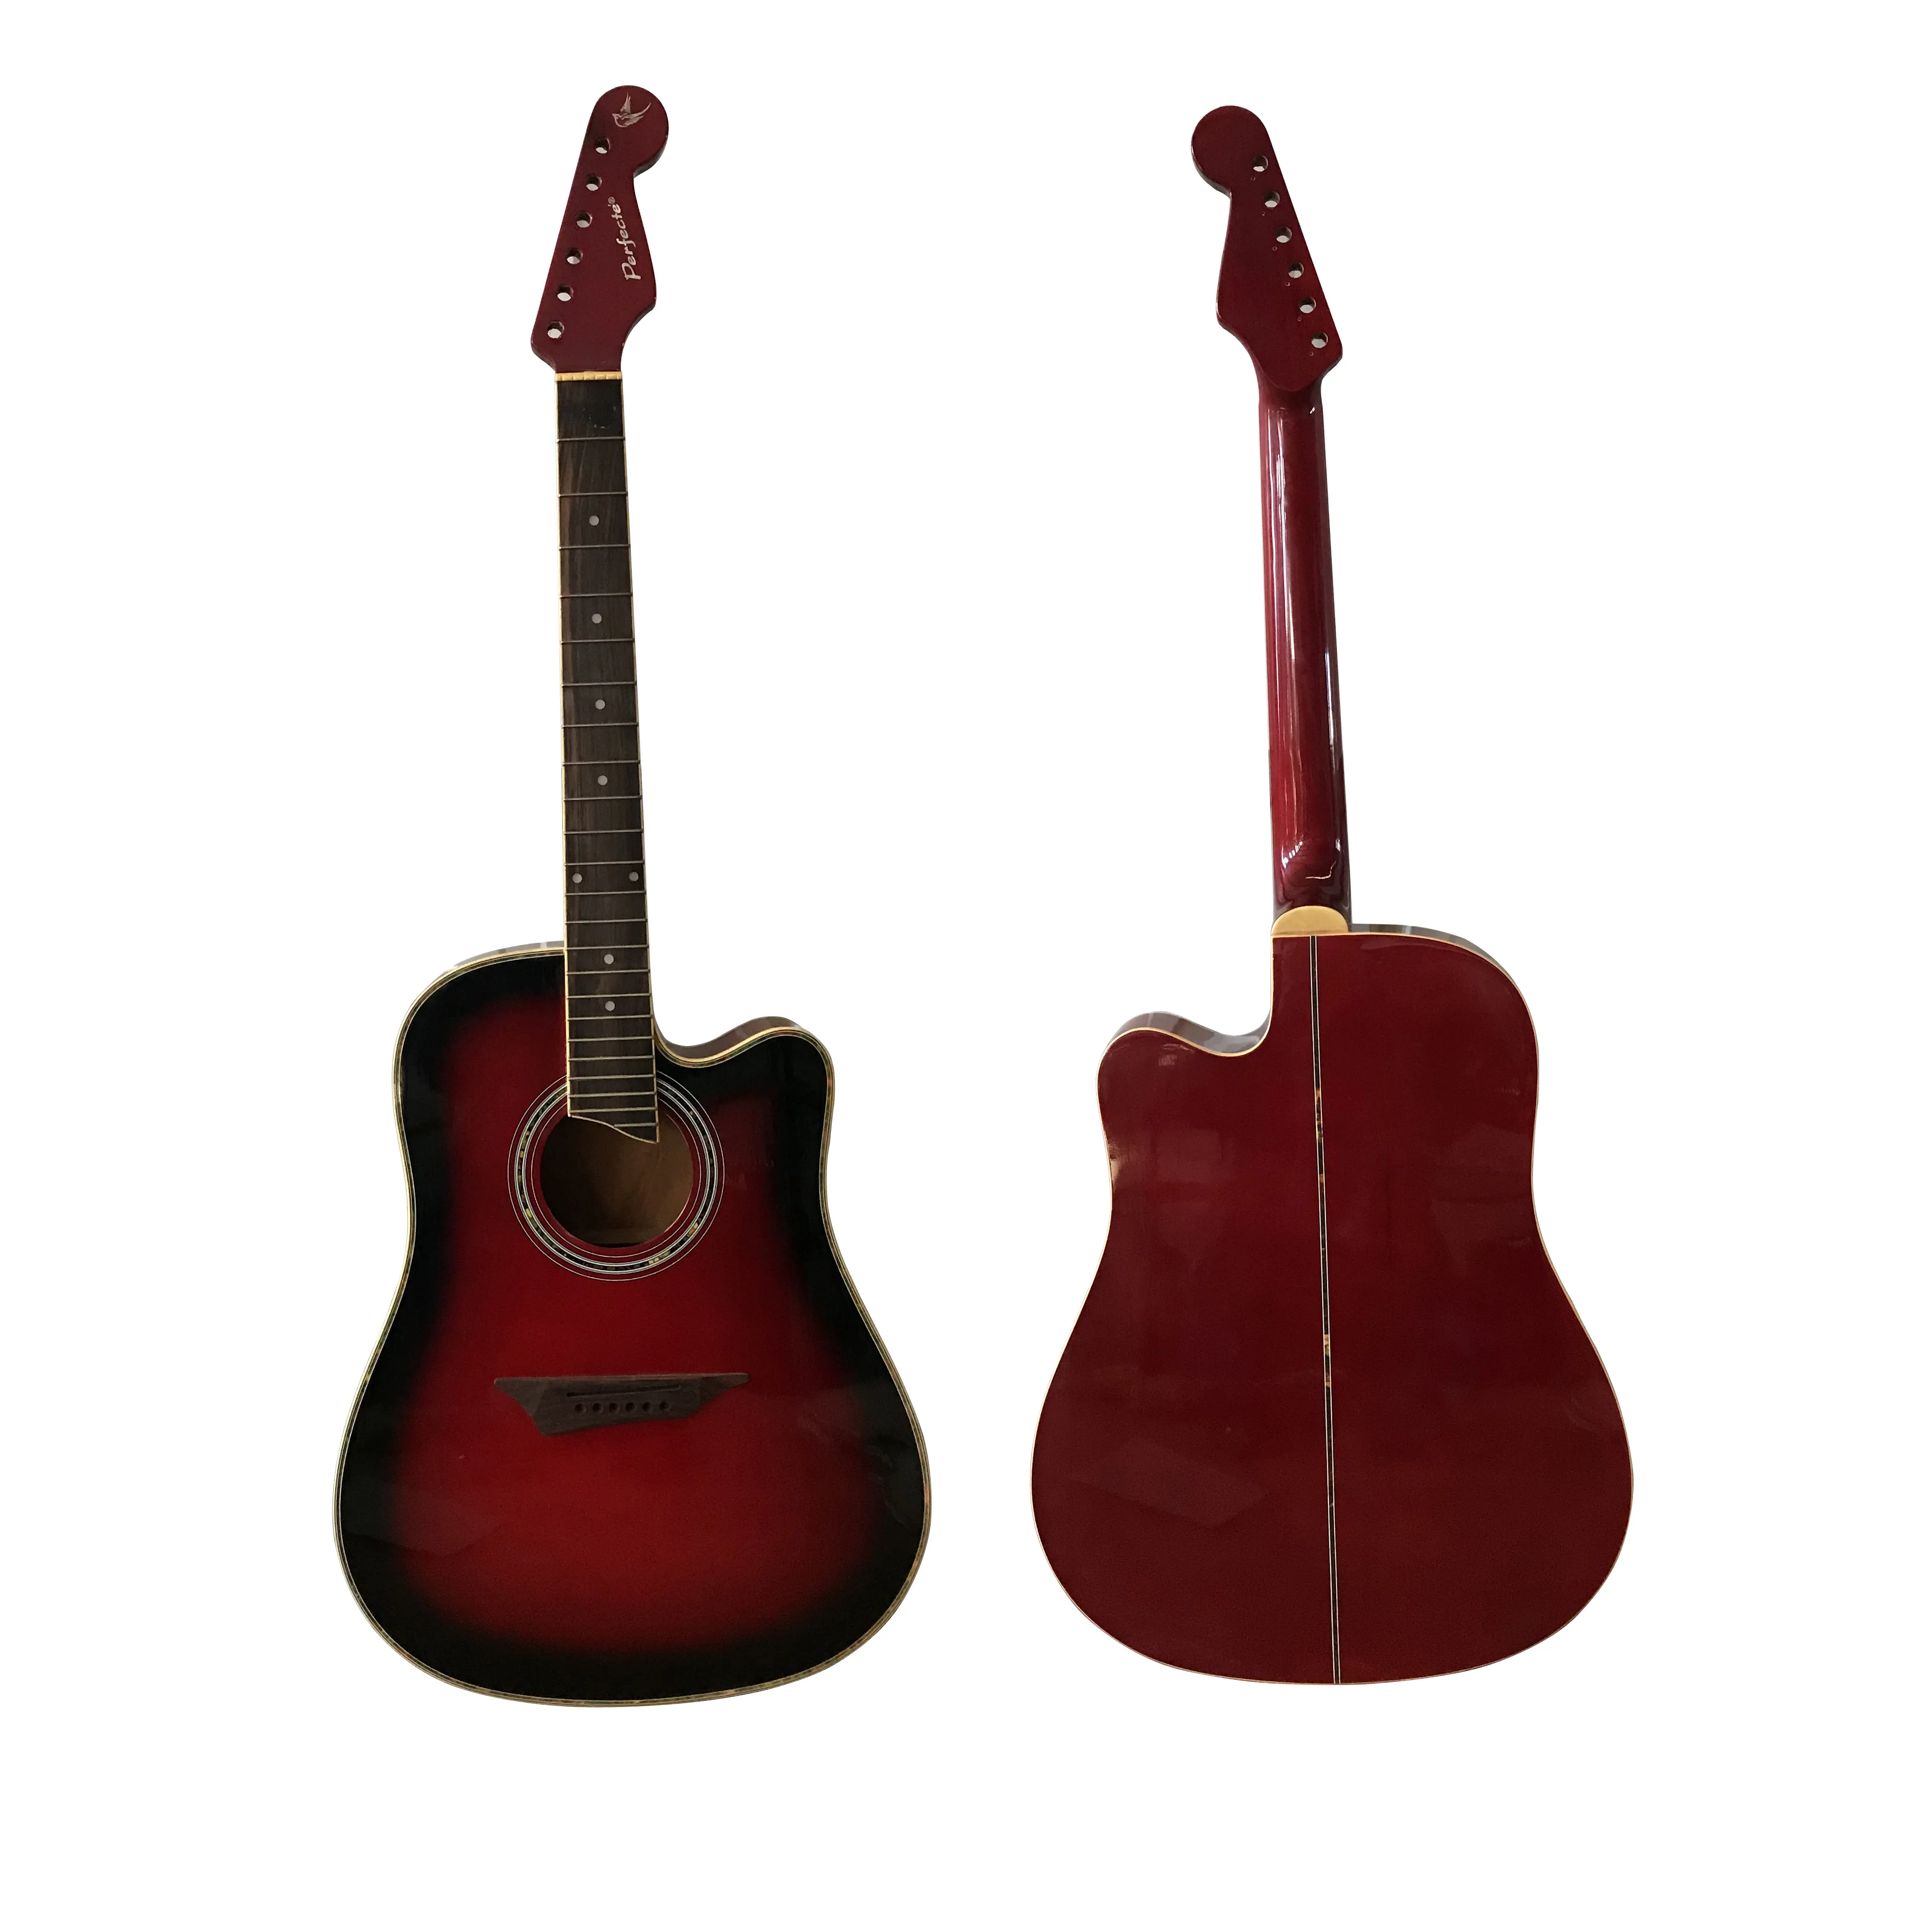 

Gloss Thin Body Acoustic Guitar Unfinished Spruce 41 Inch 24 Fret Solid Wood DIY 6 Strings Red Sunset Color Stock Folk Guitar